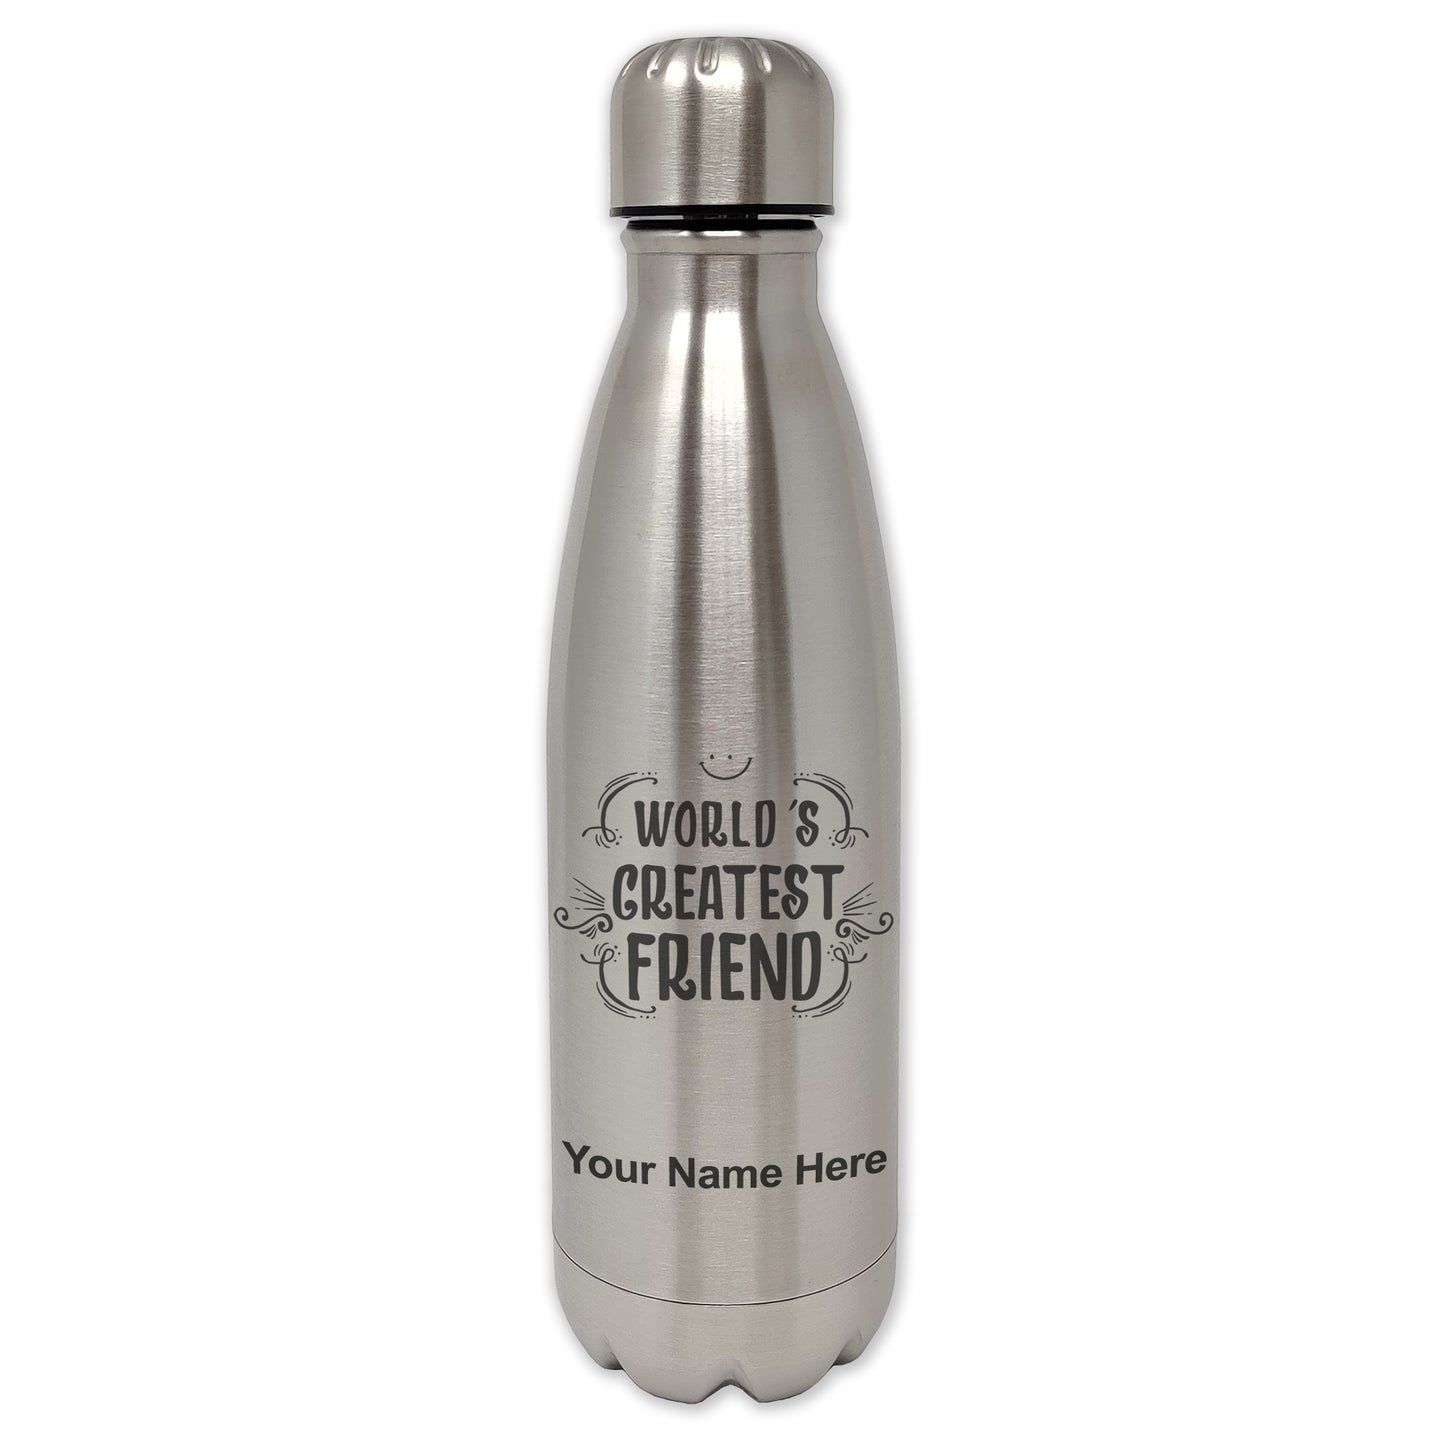 LaserGram Double Wall Water Bottle, World's Greatest Friend, Personalized Engraving Included